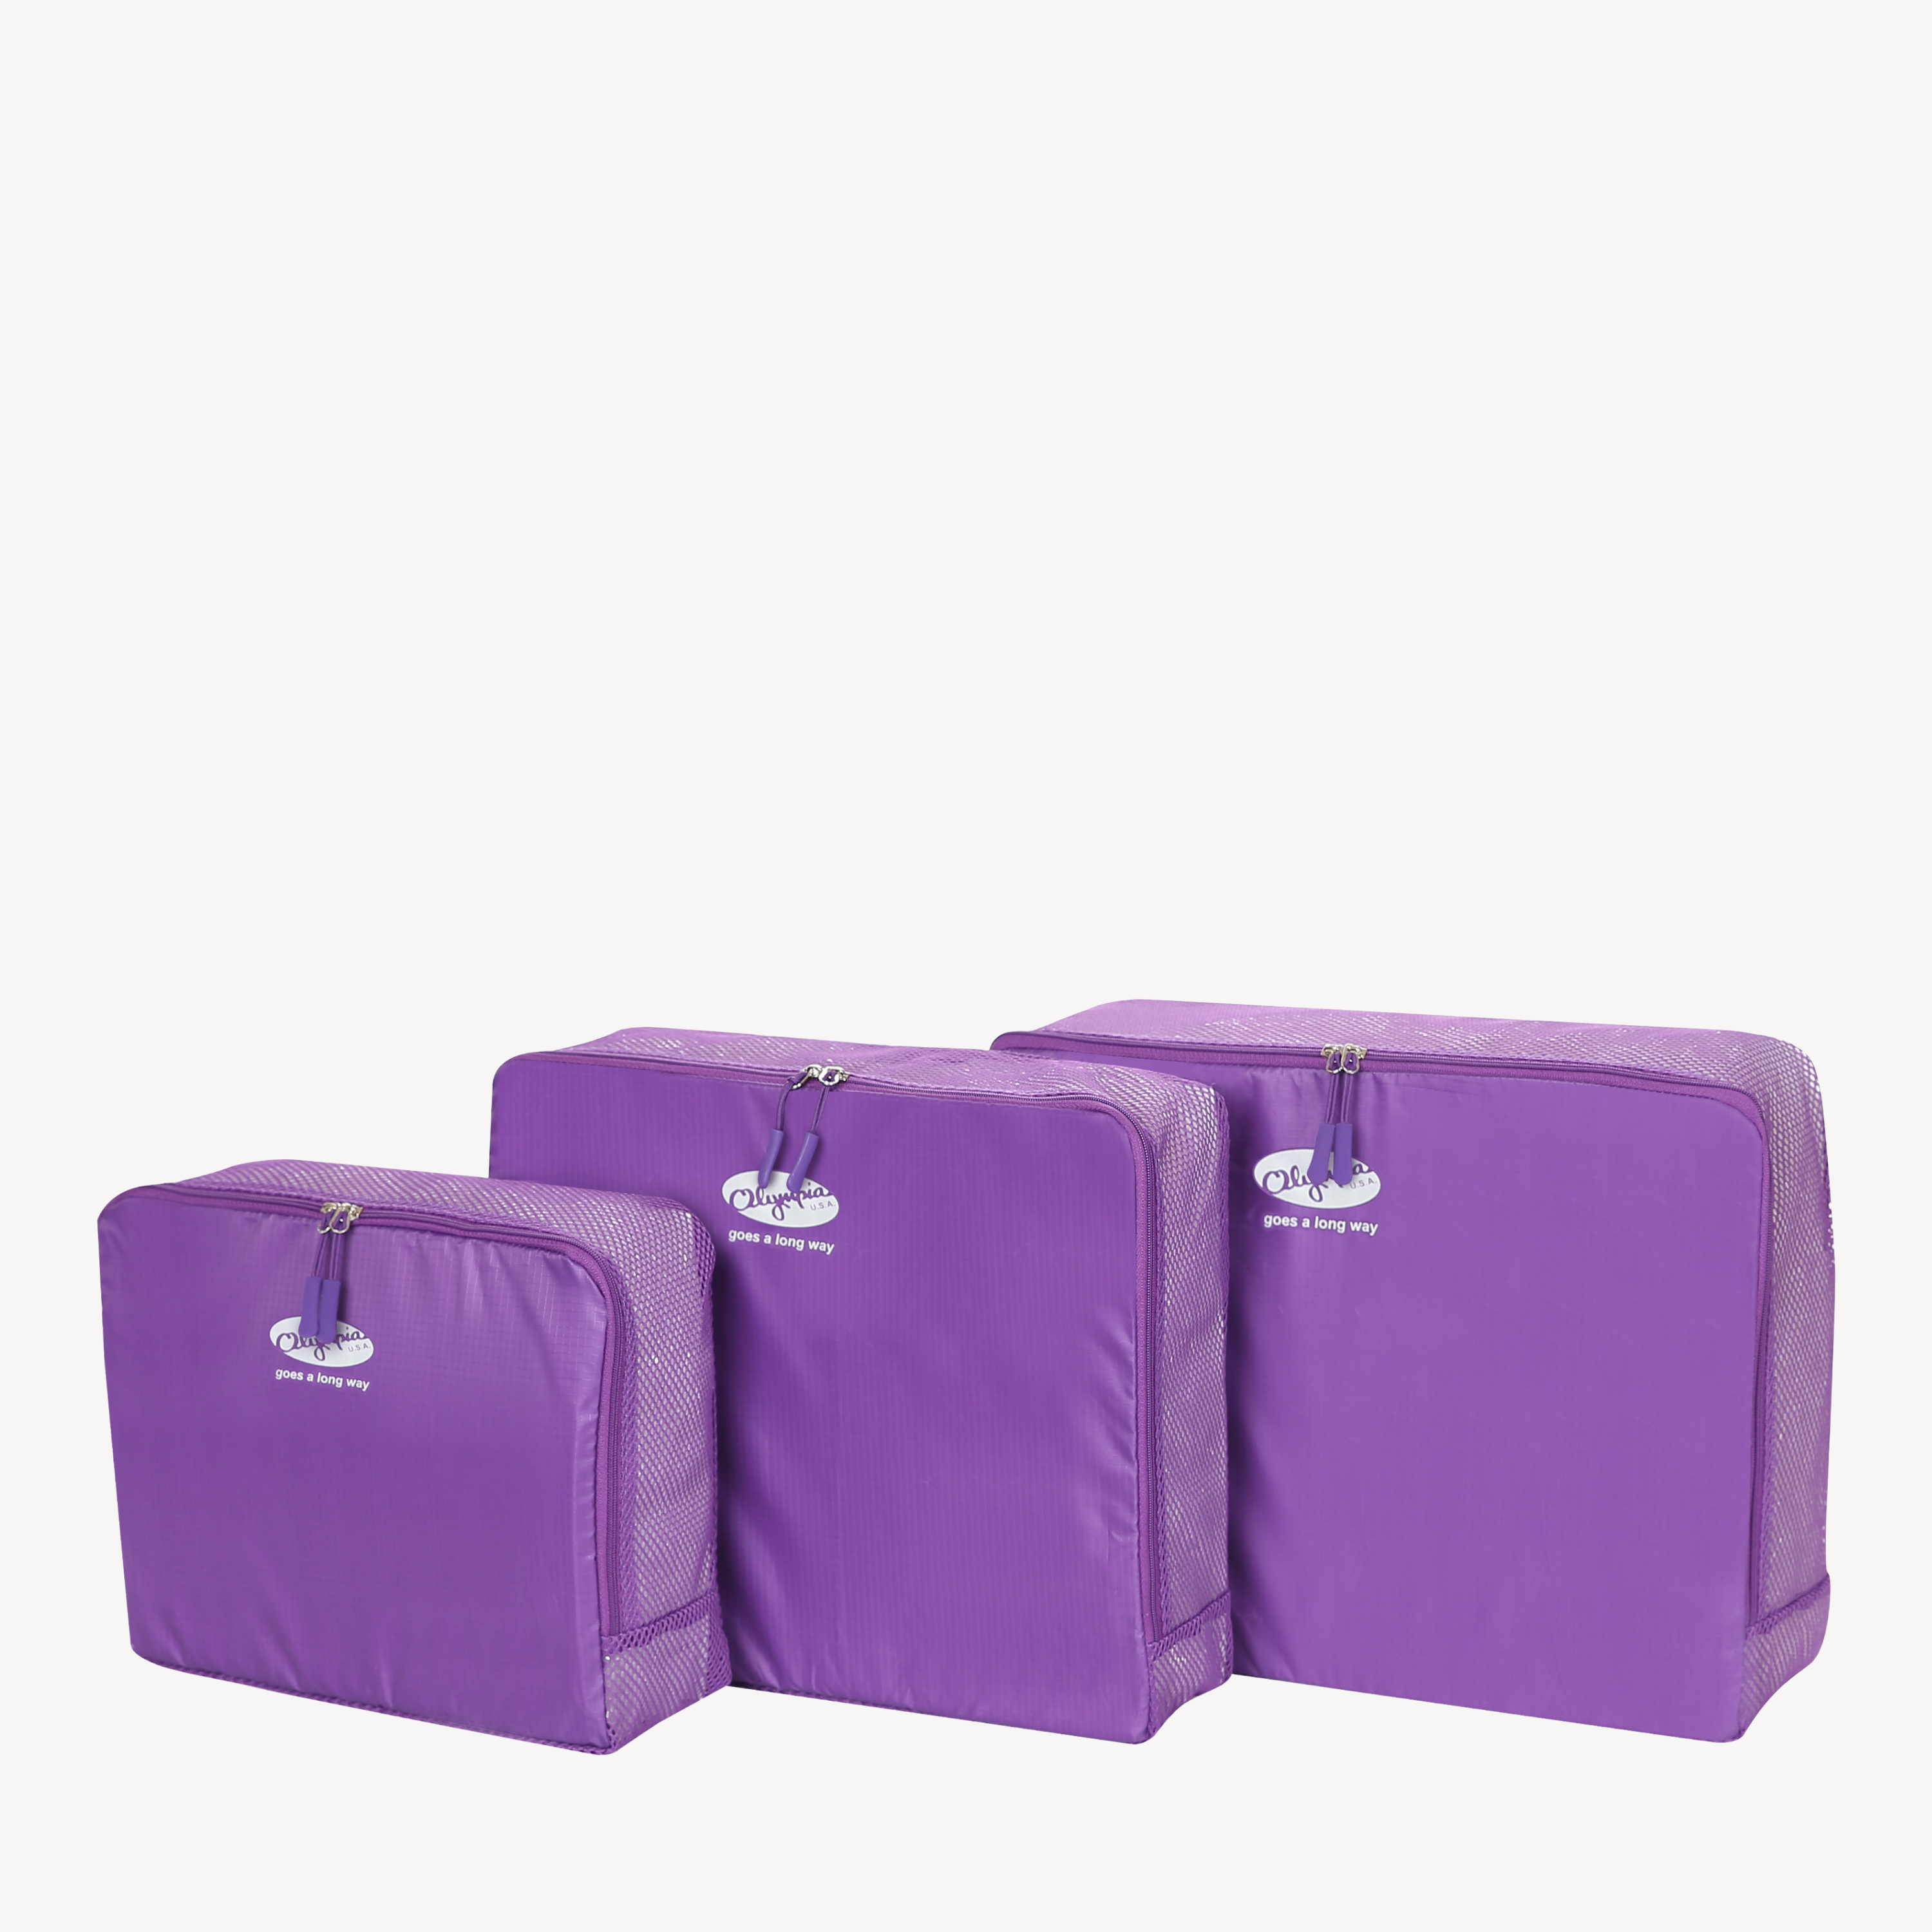 {Mother's Day Special}3-Piece Packing Pouch Set for Organizing your Travel Essentials